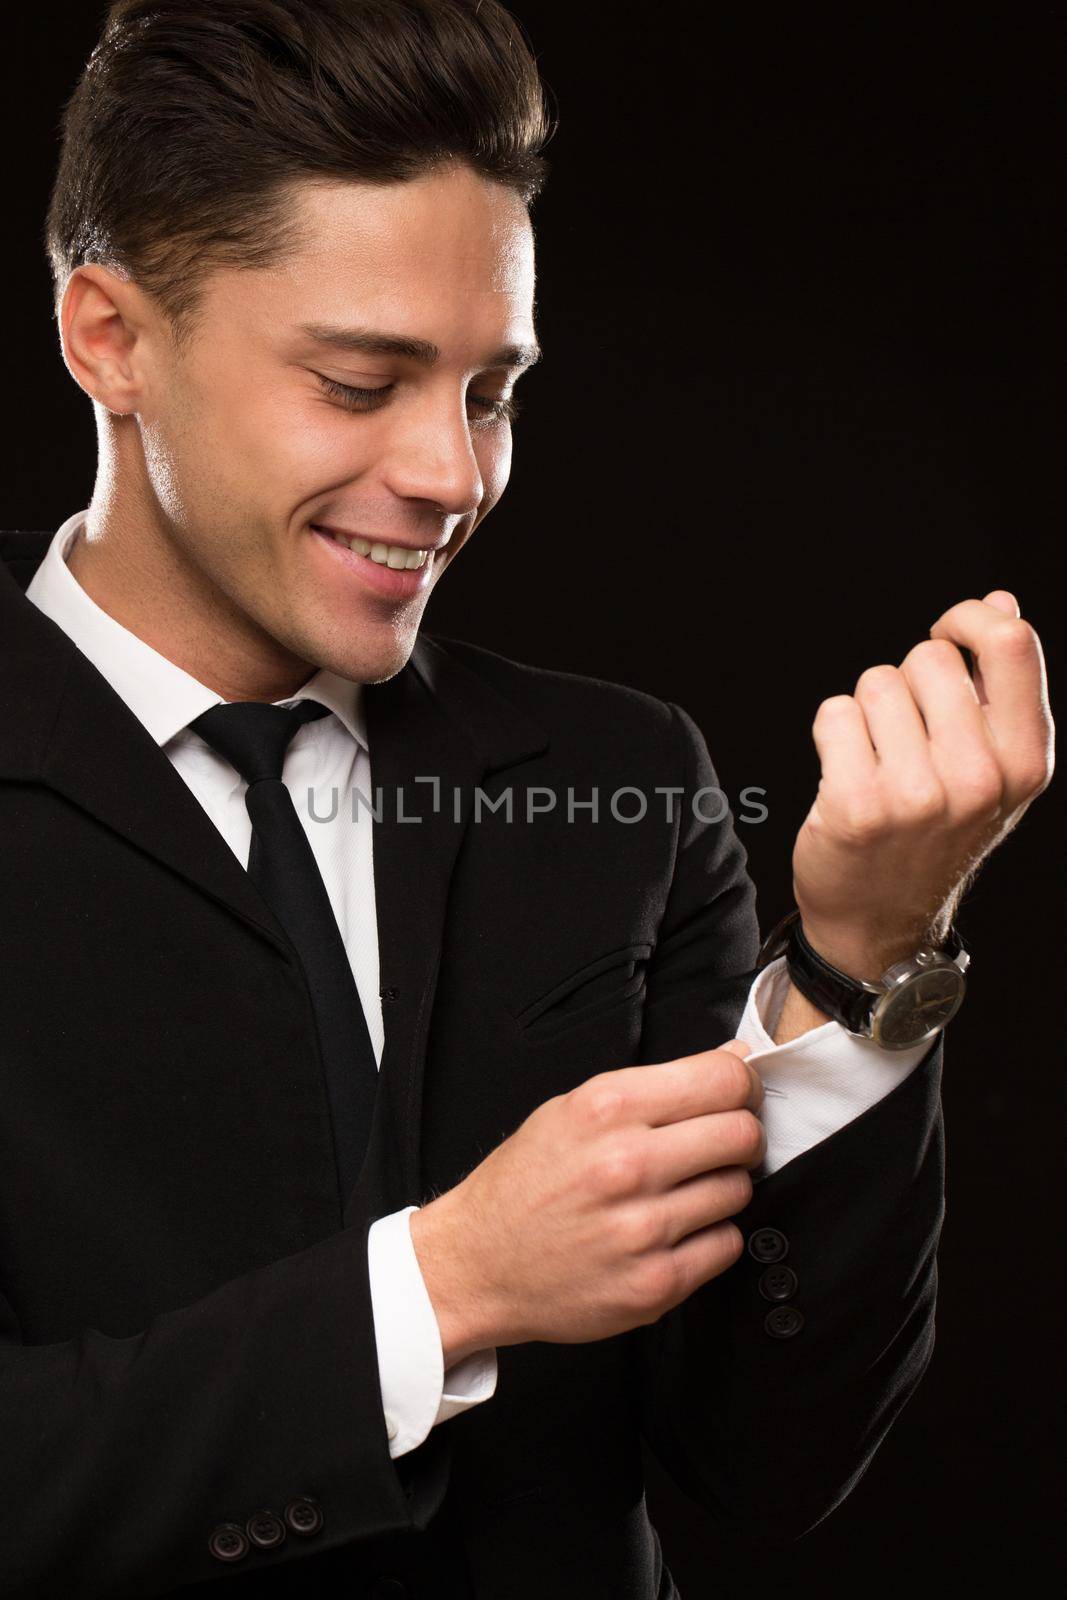 Vertical cropped shot of a handsome young suited man smiling joyfully adjusting sleeves of his shirt on black background macho positivity confidence success achievement businesspeople style